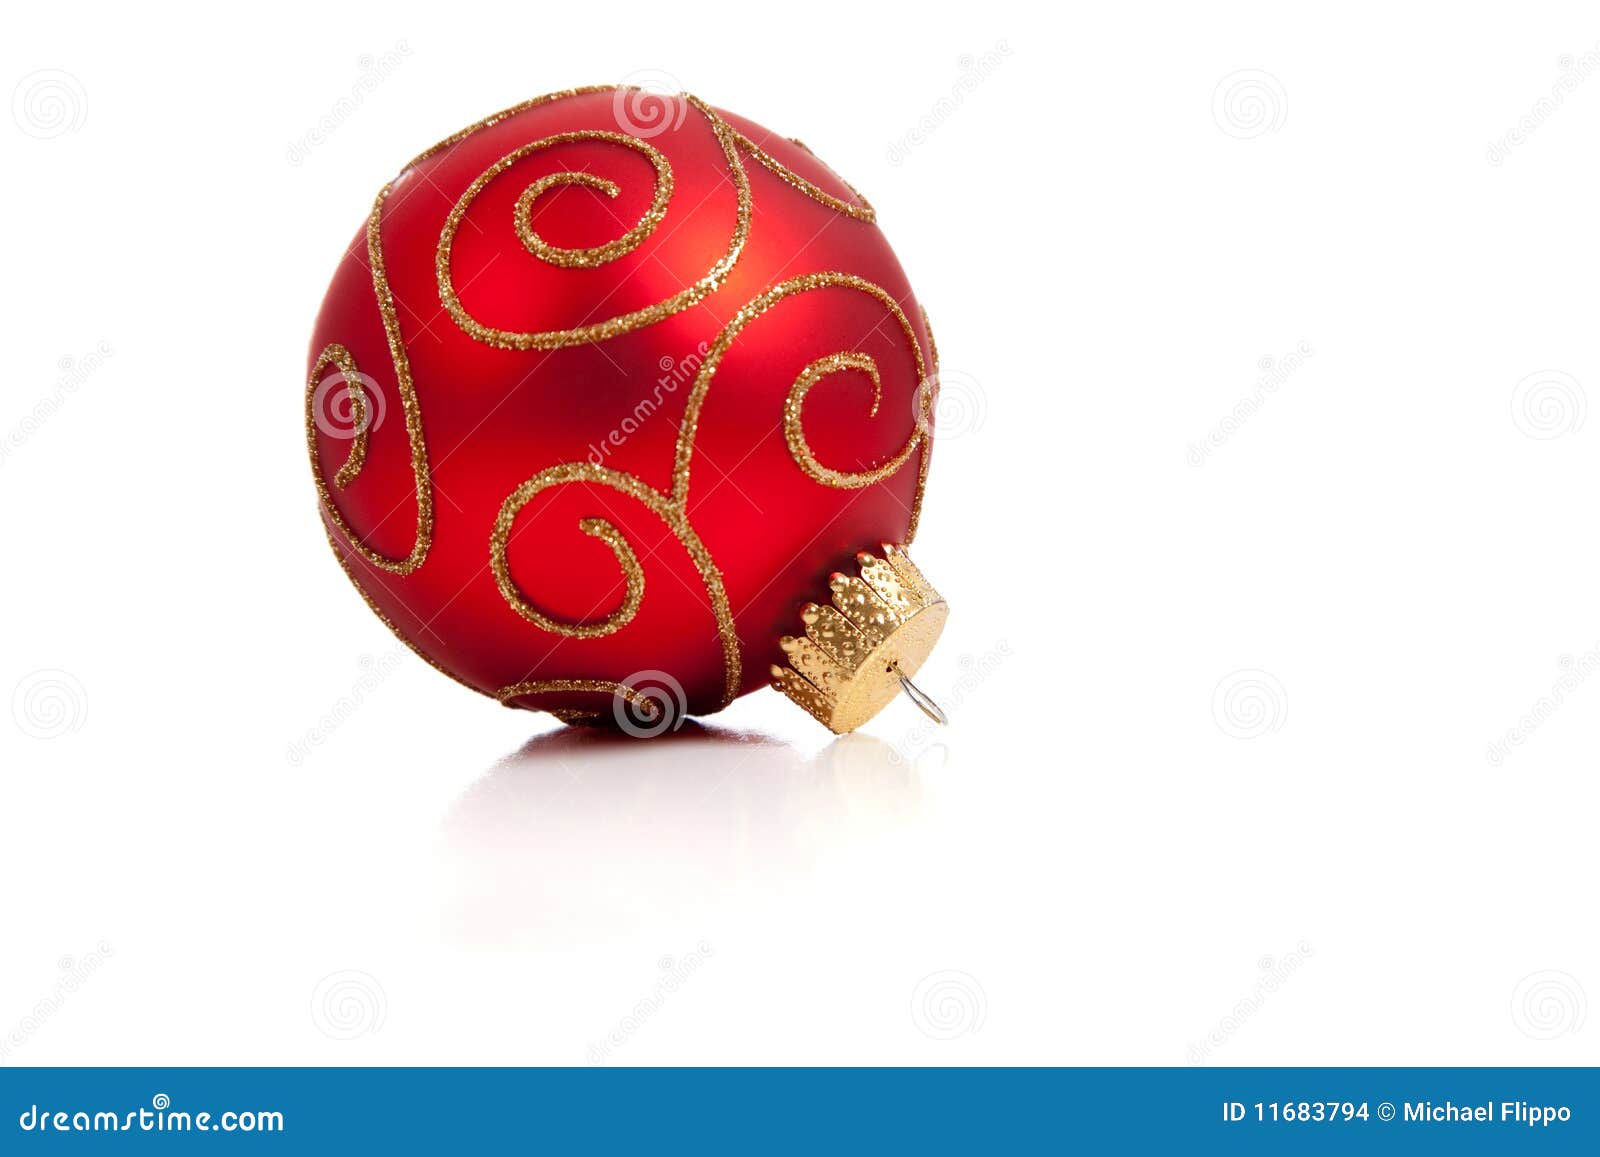 A Red, Glittery Christmas Ornament on White Stock Photo - Image of ...